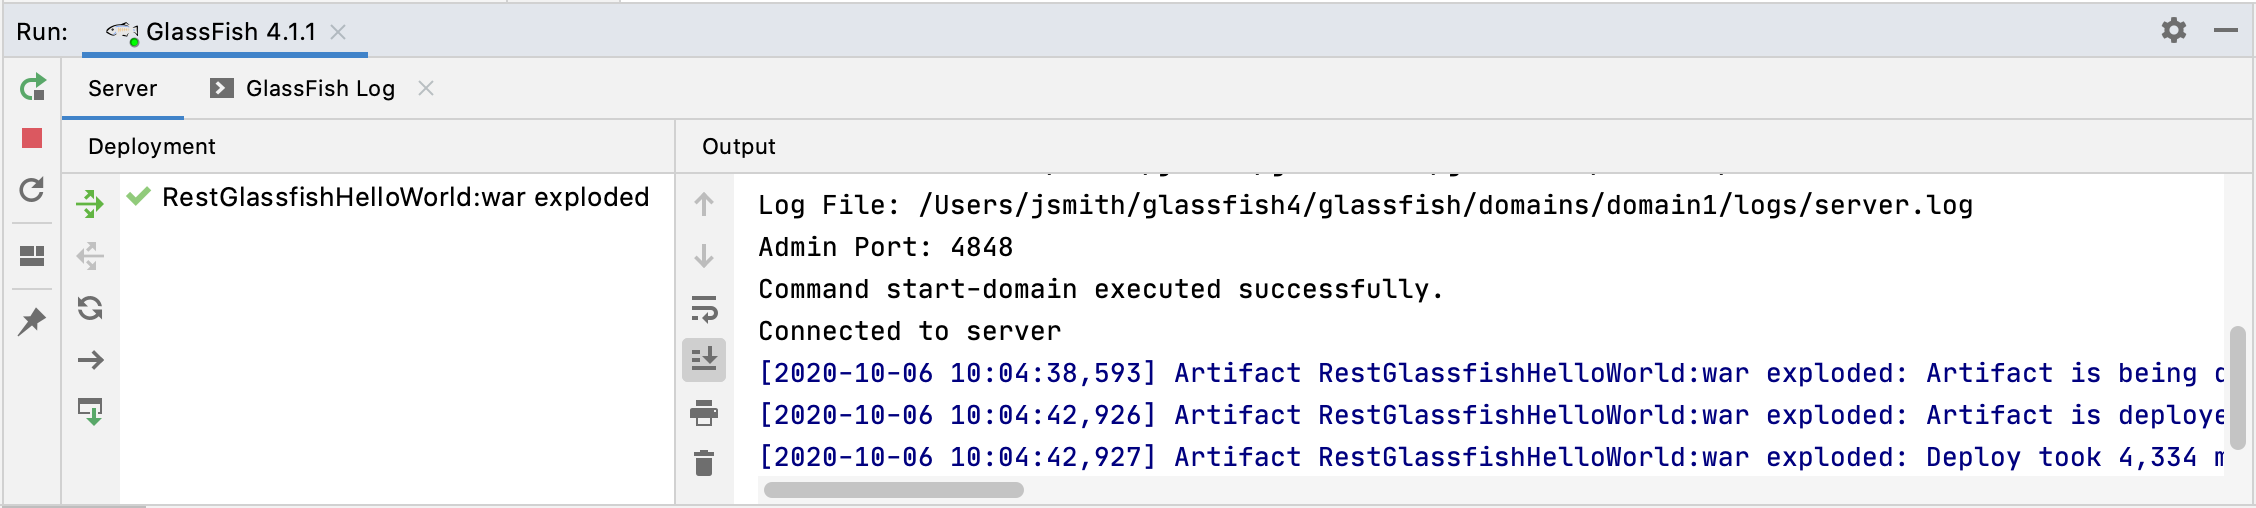 Started GlassFish server and deployed application in the Run tool window